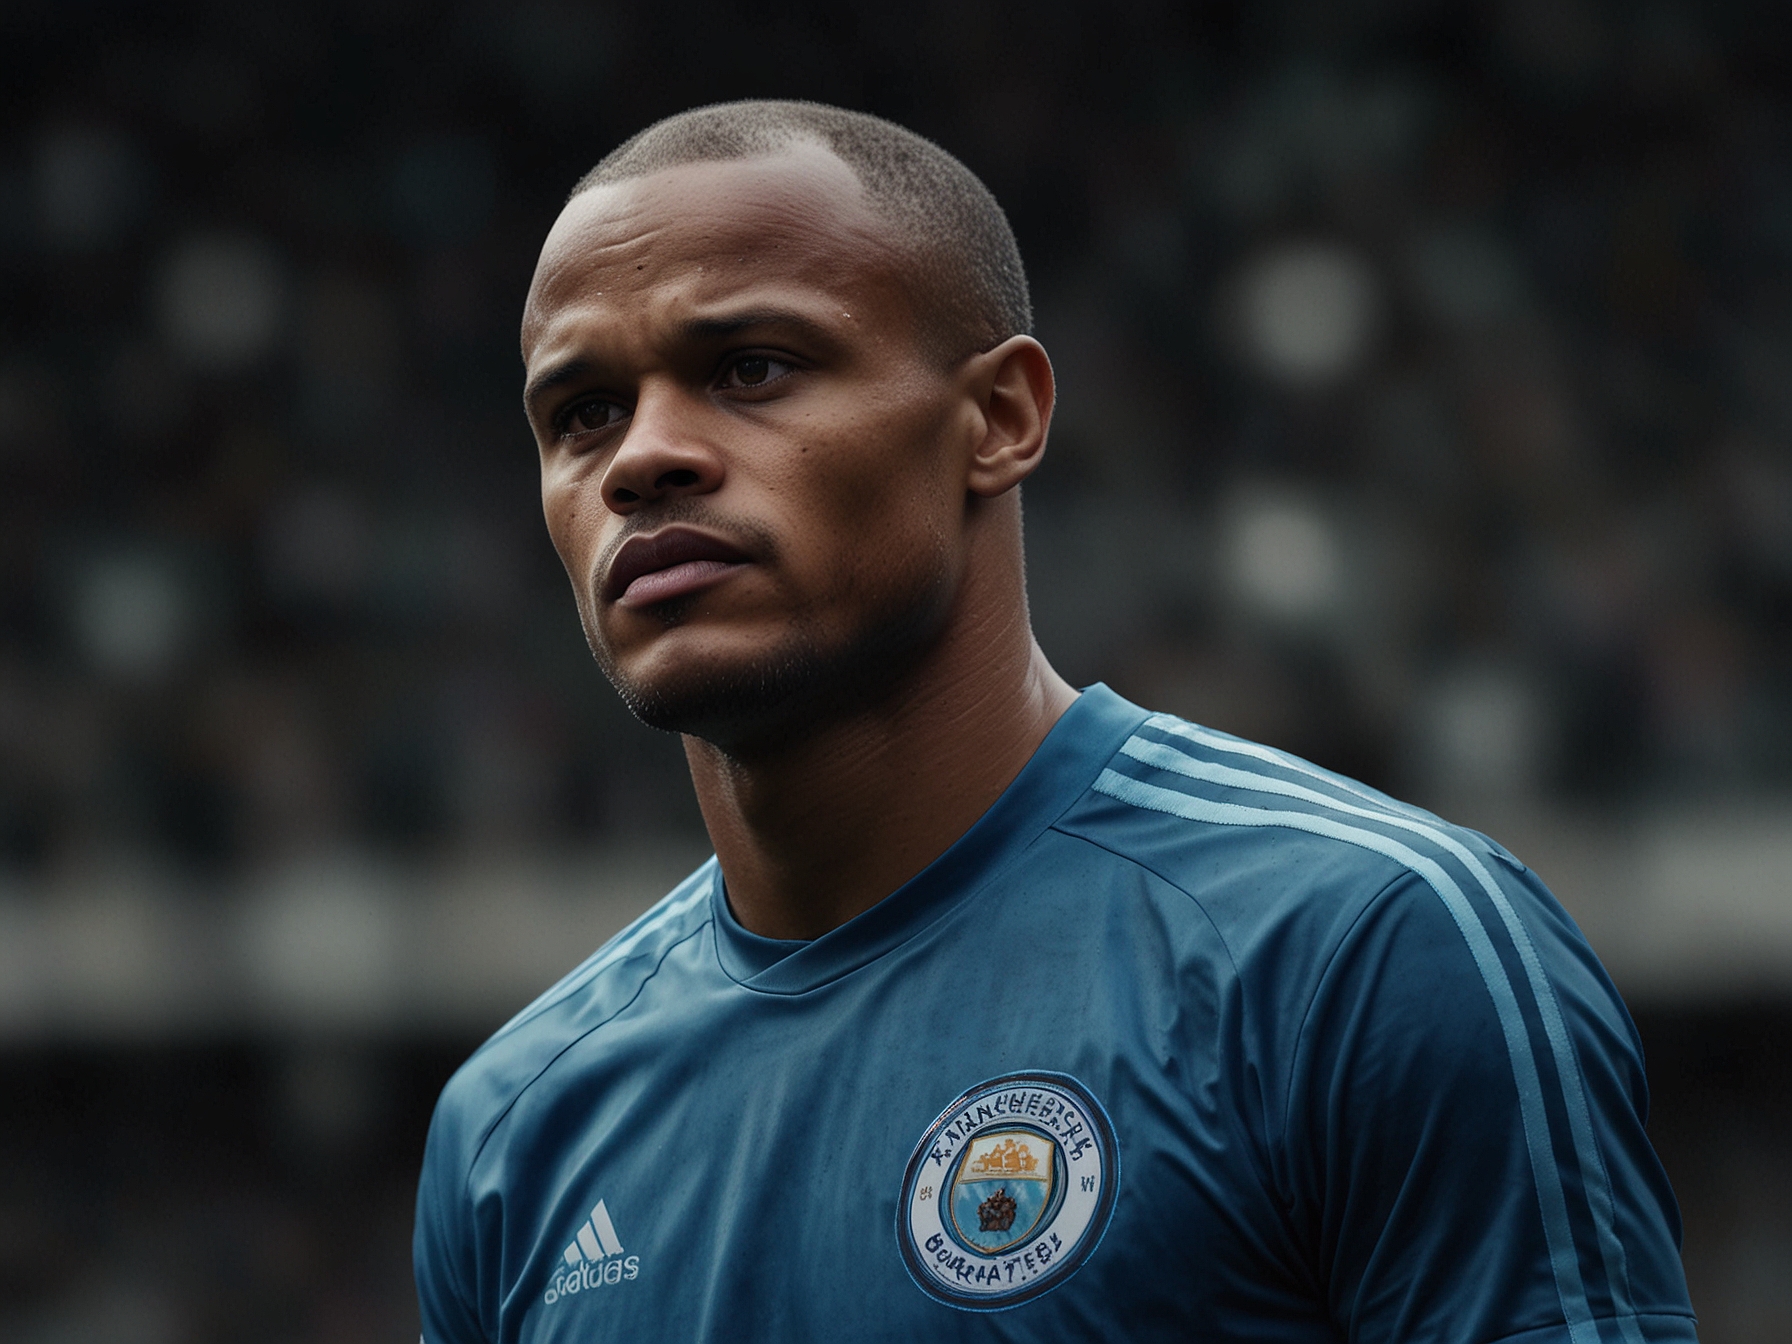 Vincent Kompany, the Premier League manager, weighing the decision of a potential transfer that could impact both his club and Bayern Munich's future prospects.